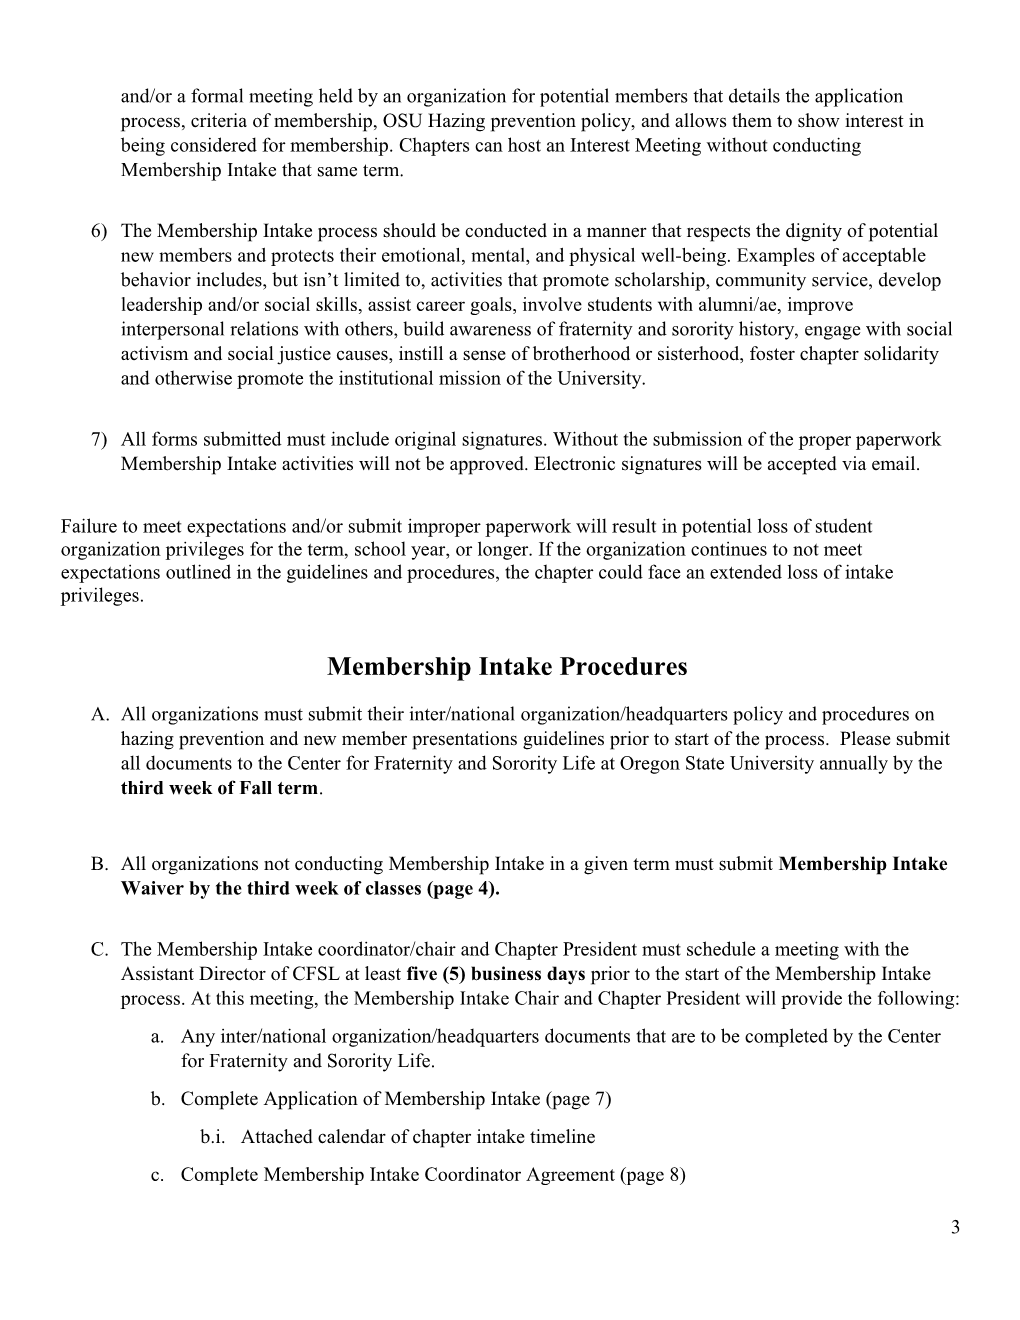 Center for Fraternity and Sorority Life Membership Intake Guidelines and Procedures